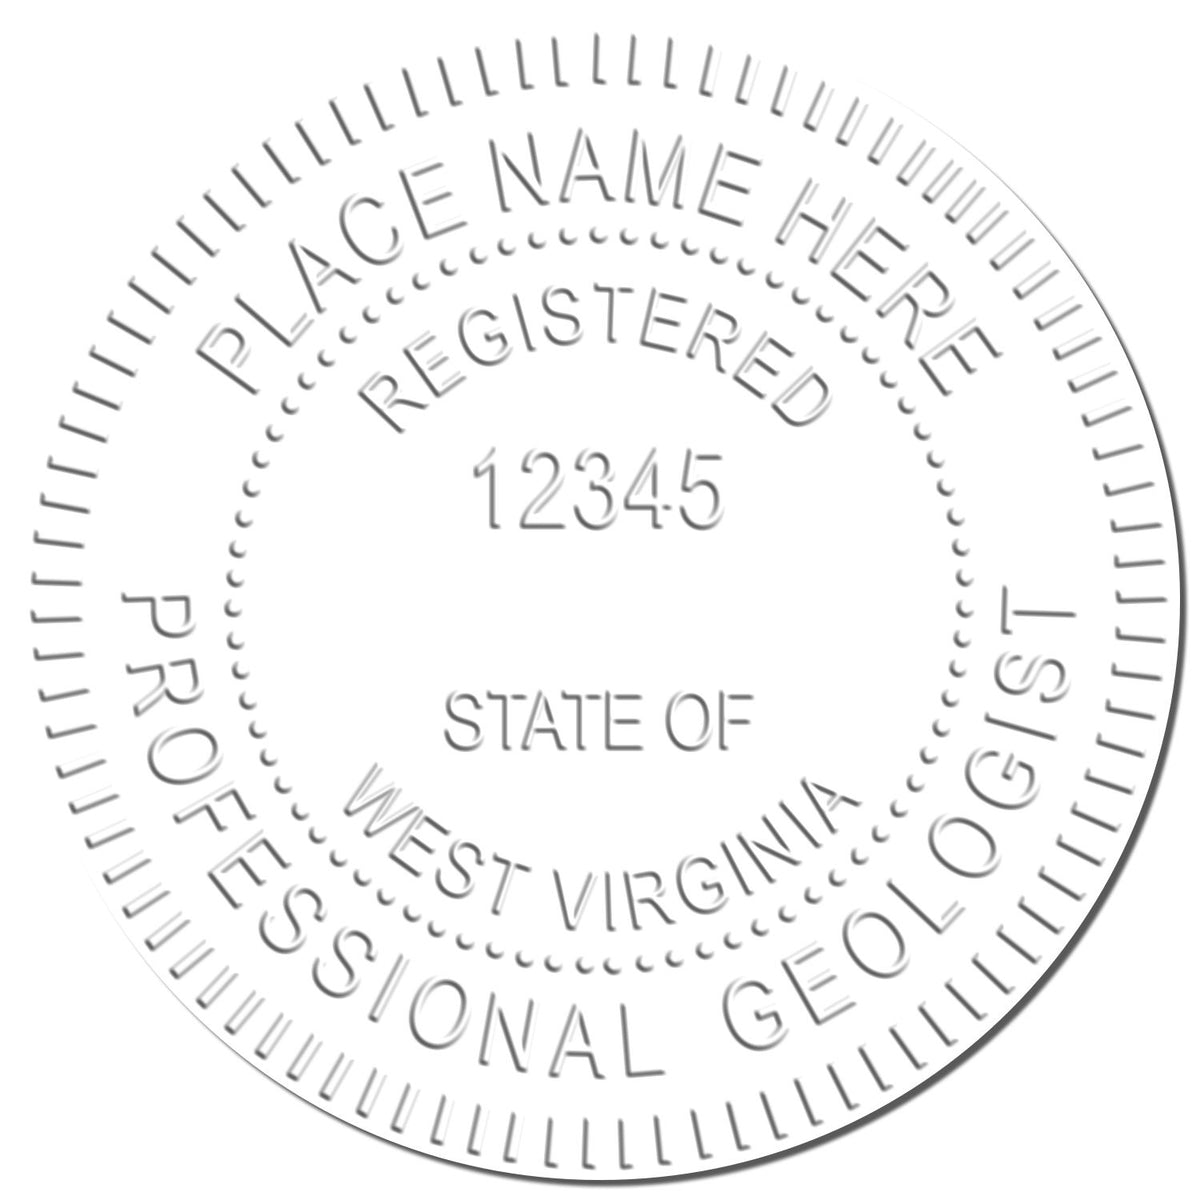 The West Virginia Geologist Desk Seal stamp impression comes to life with a crisp, detailed image stamped on paper - showcasing true professional quality.